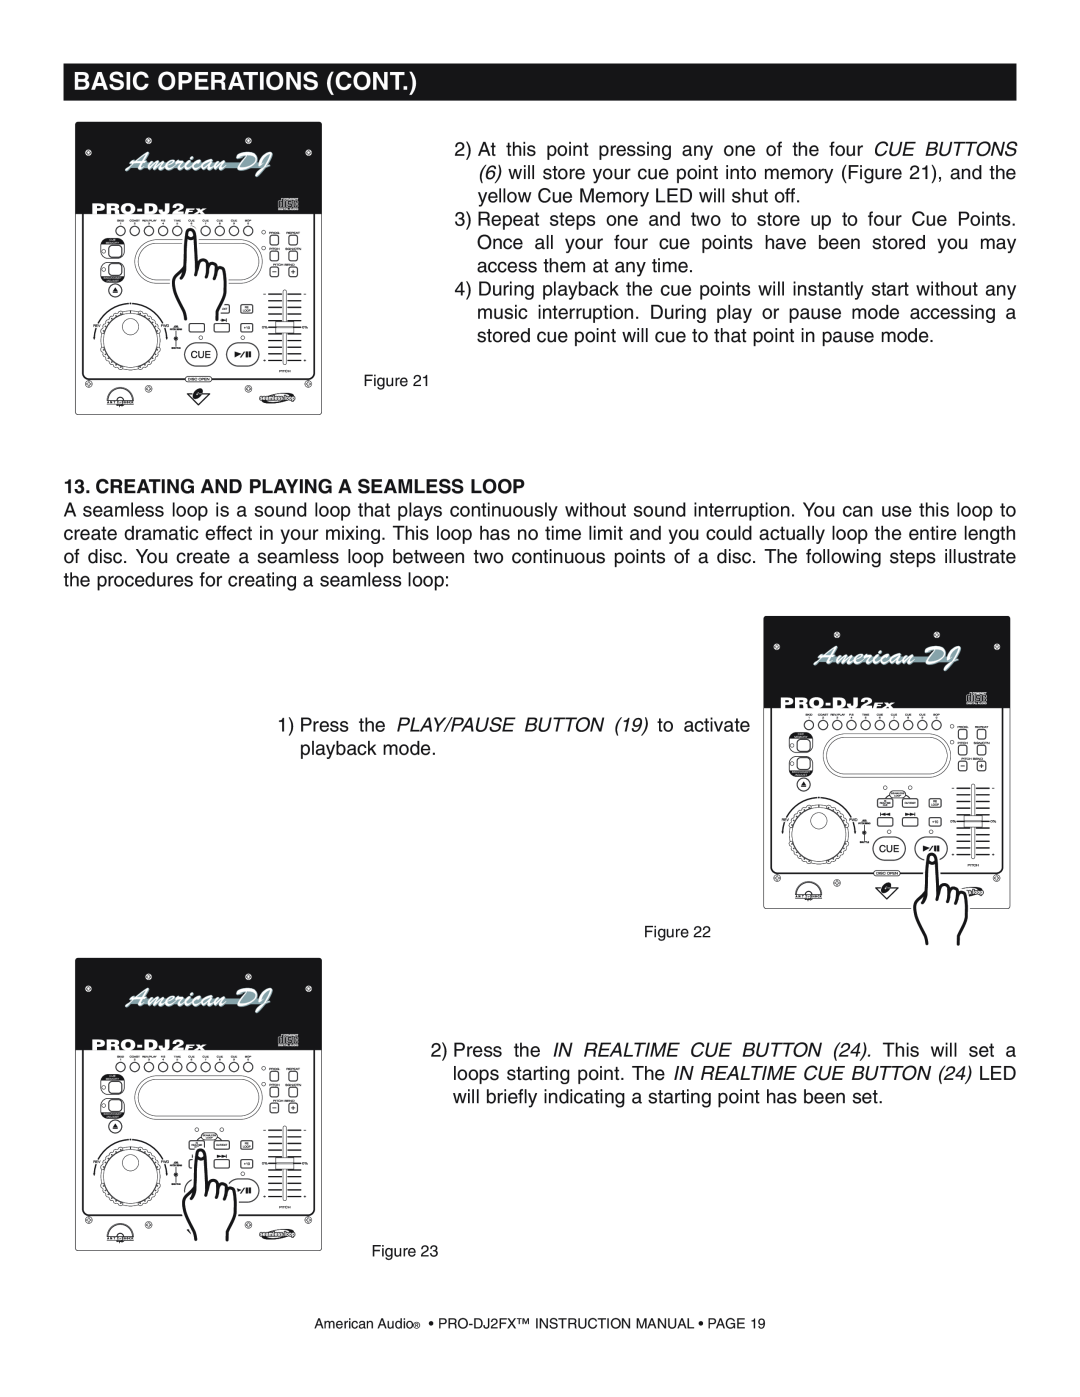 American Audio PRO-DJ2FX operating instructions Basic Operations Cont, Creating And Playing A Seamless Loop 